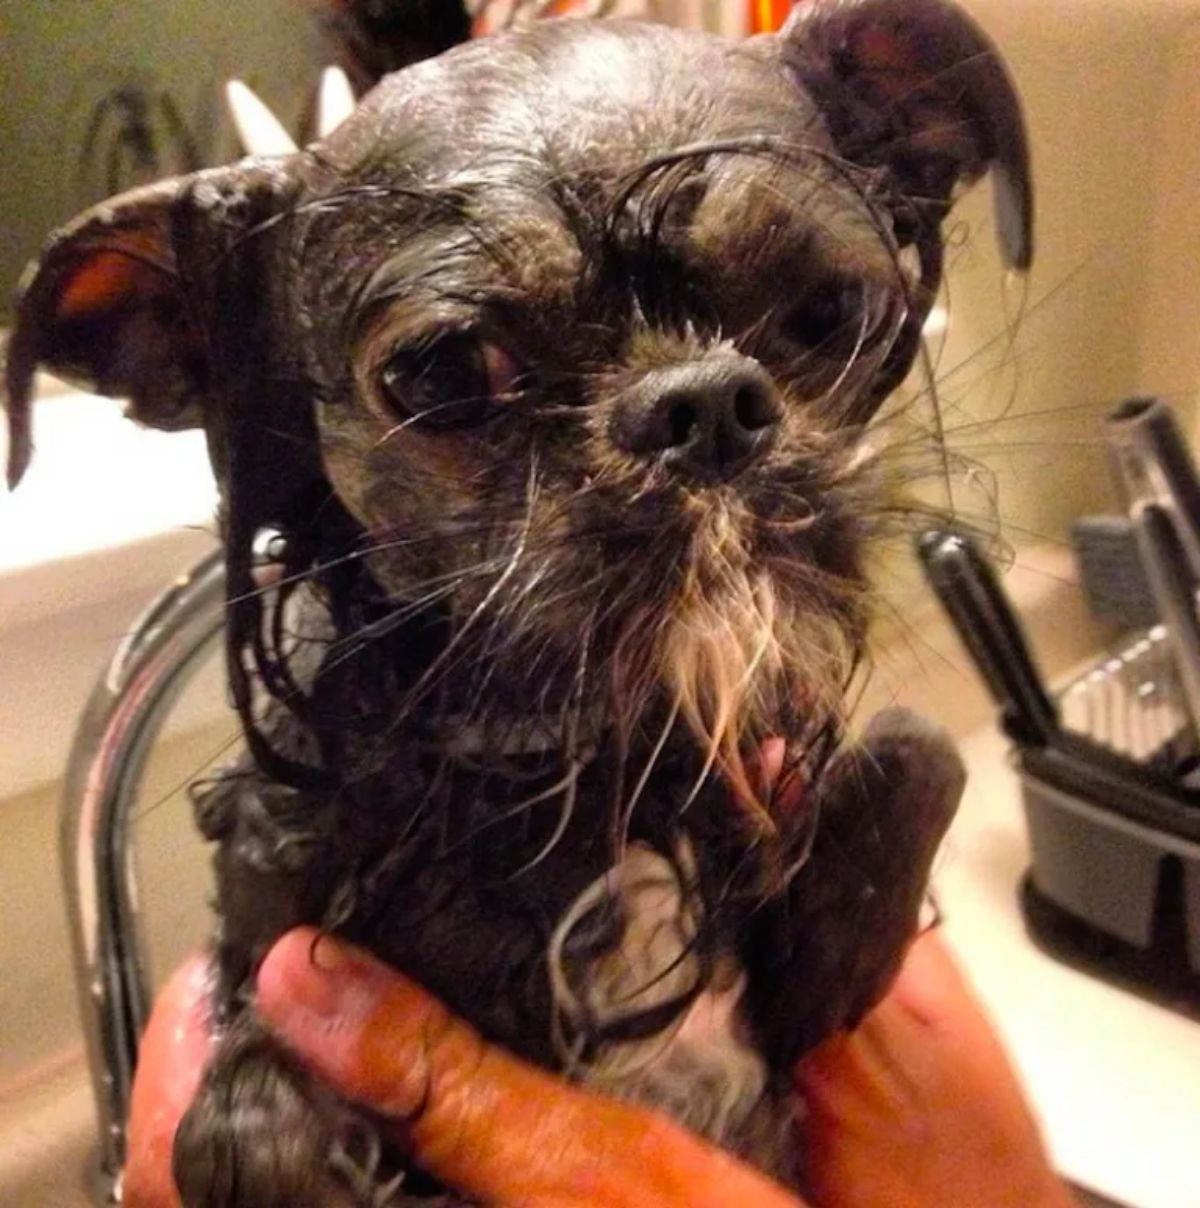 black and white Brussels Griffon and Shih Tzu mix dog getting bathed at a kitchen sink